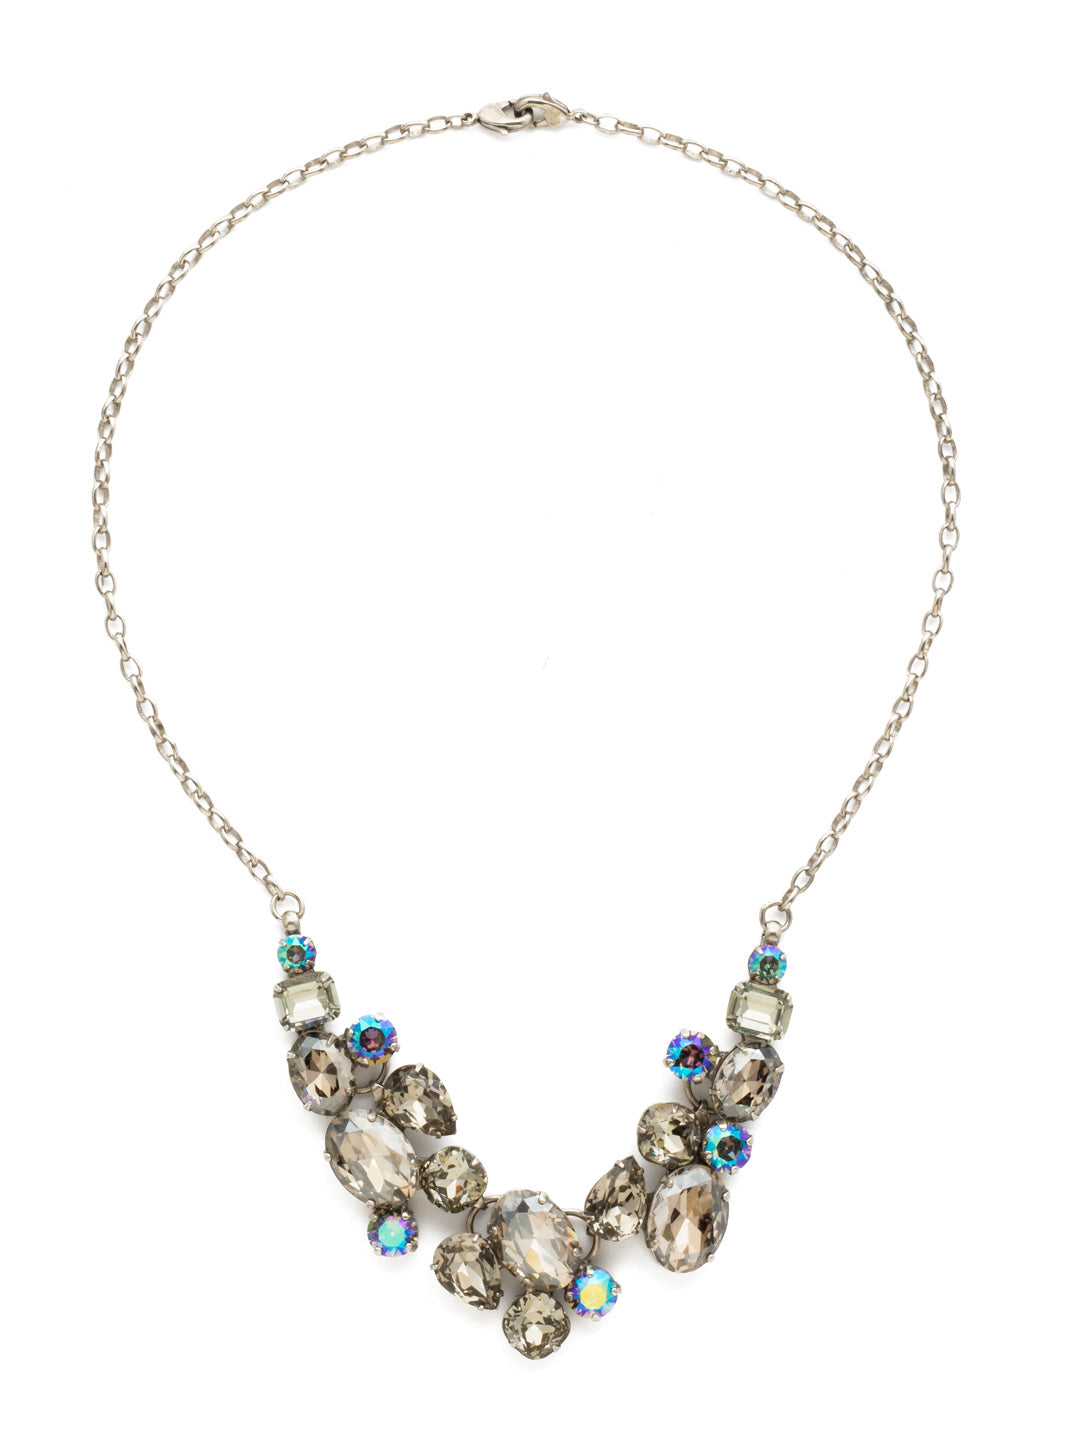 Forget-Me-Not Necklace Bib Necklace - NDQ6ASCRO - Captivating clusters of oval, pear, emerald, cushion and round cut crystals form a design that's fun and easy with sparkle for days! This style also features a double lobster claw closure which allows for extreme length adjustment and easy layering with other necklaces. From Sorrelli's Crystal Rock collection in our Antique Silver-tone finish.